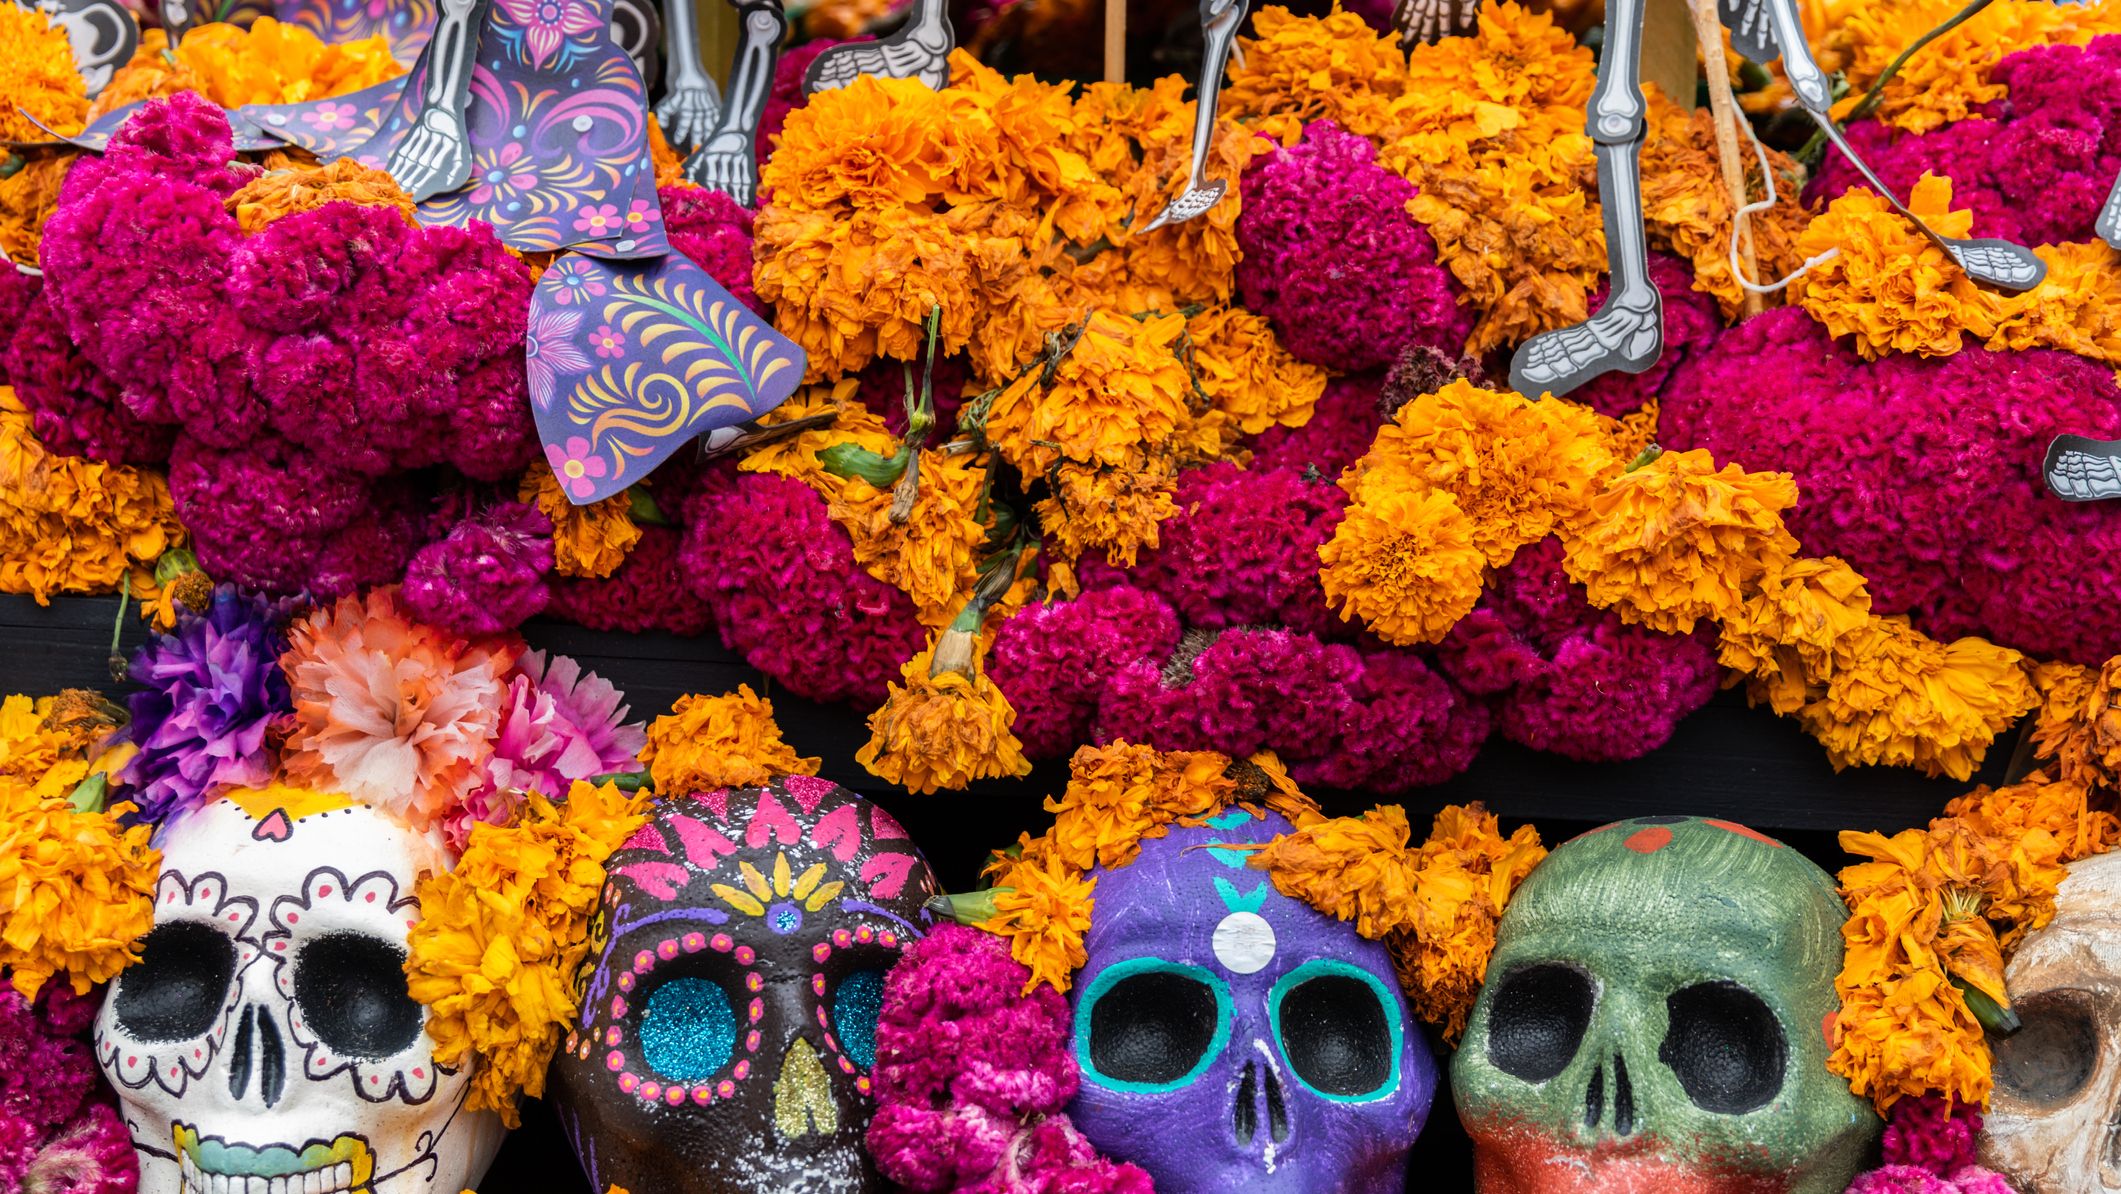 https://hips.hearstapps.com/hmg-prod/images/aztec-marigold-flowers-or-cempas-c3-bachil-and-skulls-in-royalty-free-image-1635178412.jpg?crop=1xw:0.84415xh;center,top